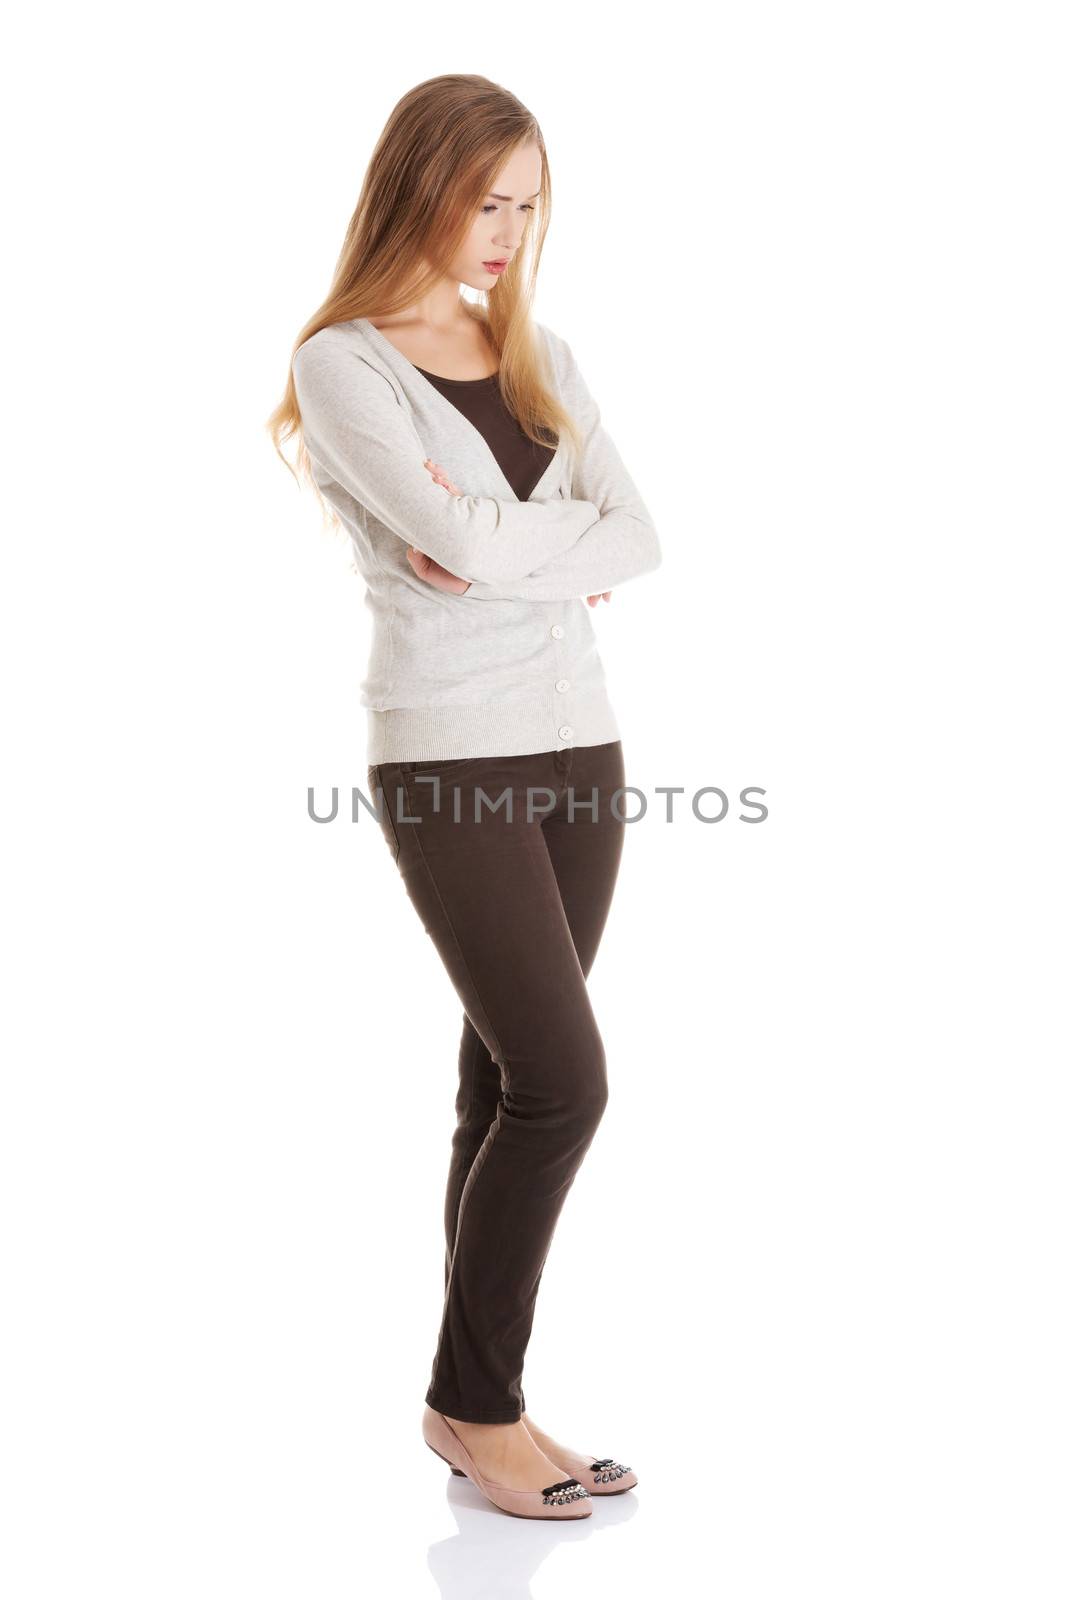 Beautiful woman is standing, lookis sad, with her hands crossed. Isolated on white.